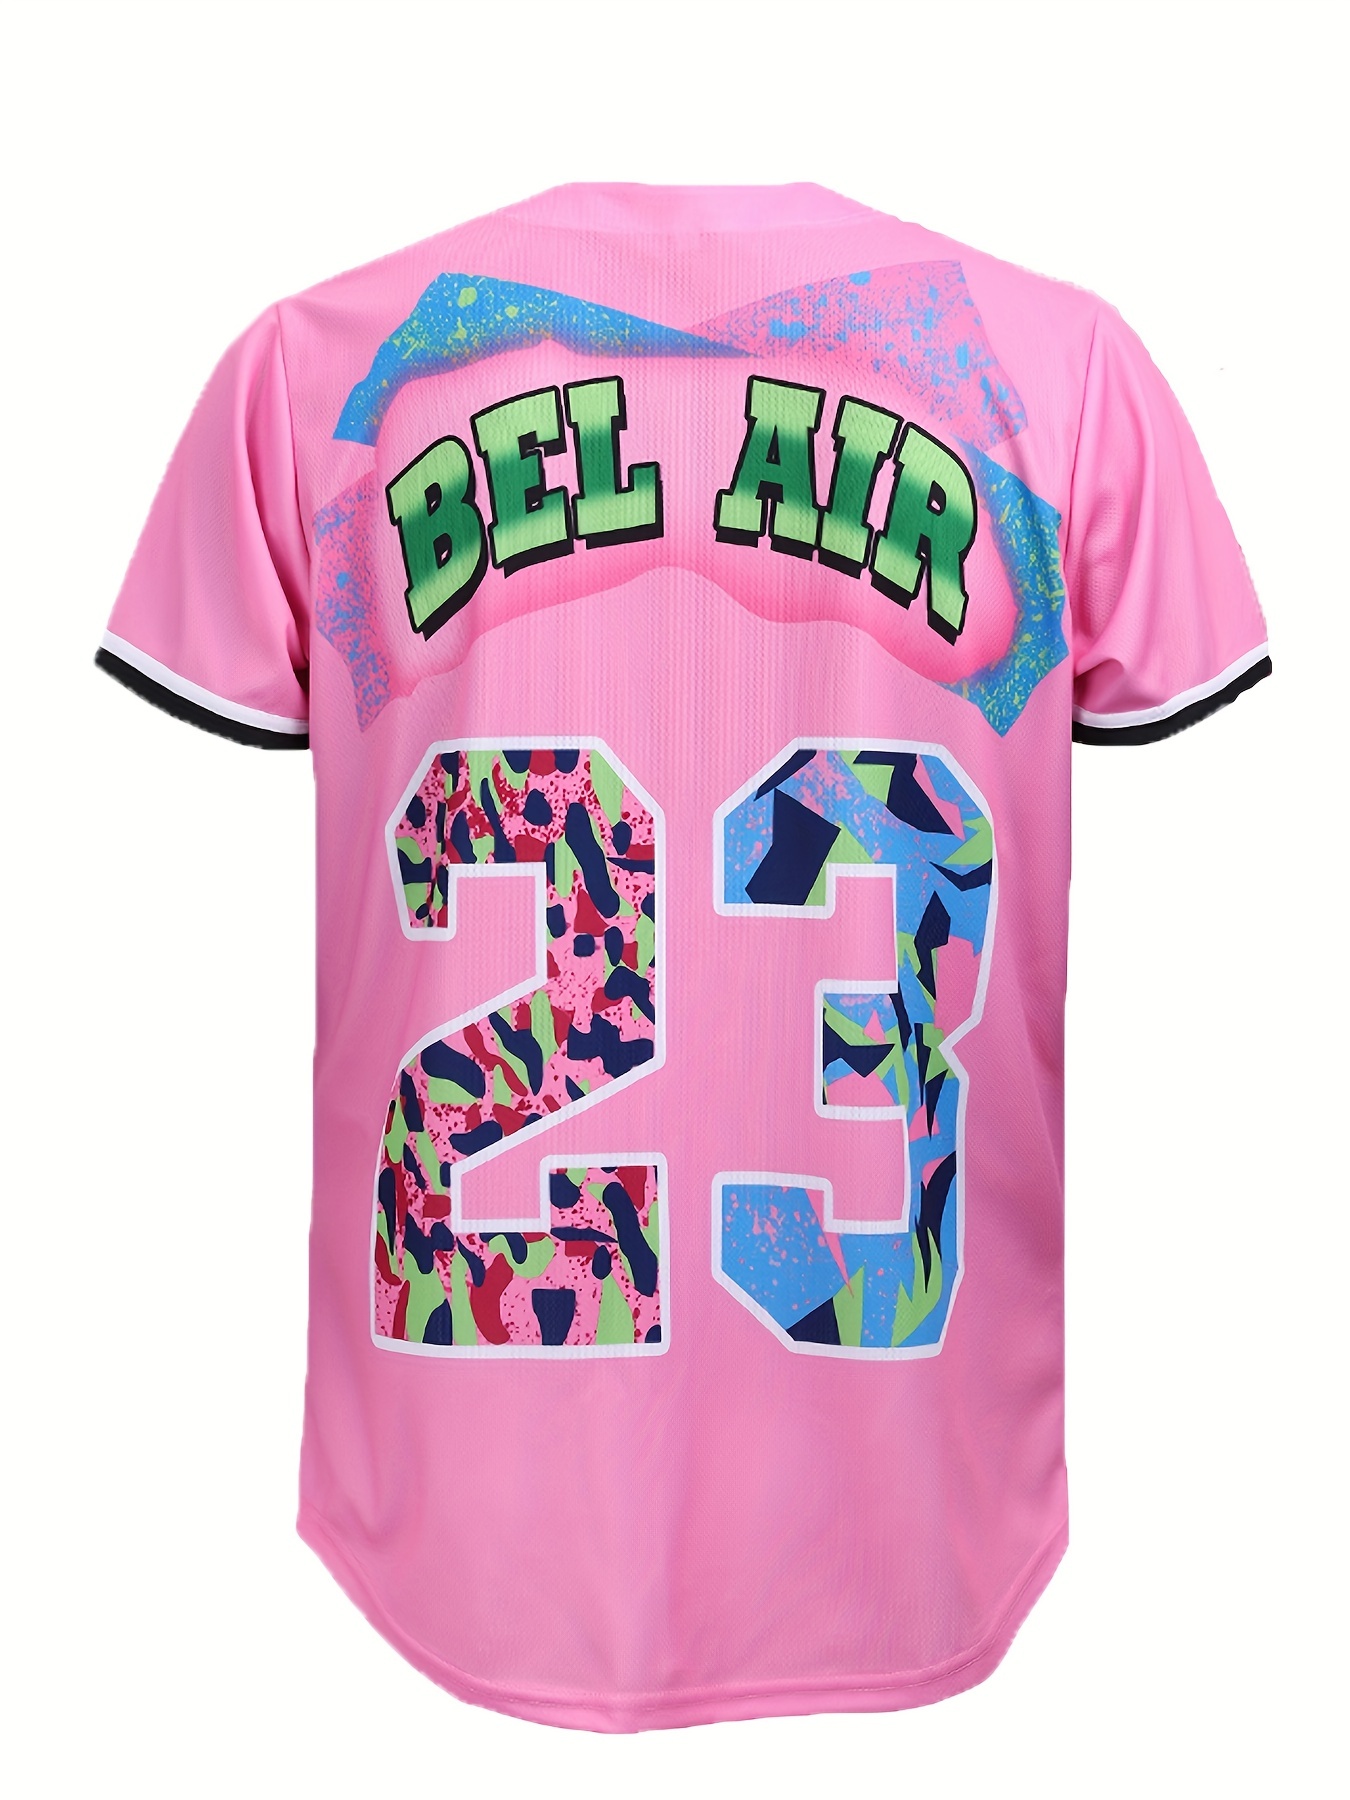 Men's Bel Air #30 Baseball Jersey, 90's City Theme Party Clothing, Hip Hop Fashion Button Up Short Sleeve Shirt Suitable for Birthday Parties,Temu